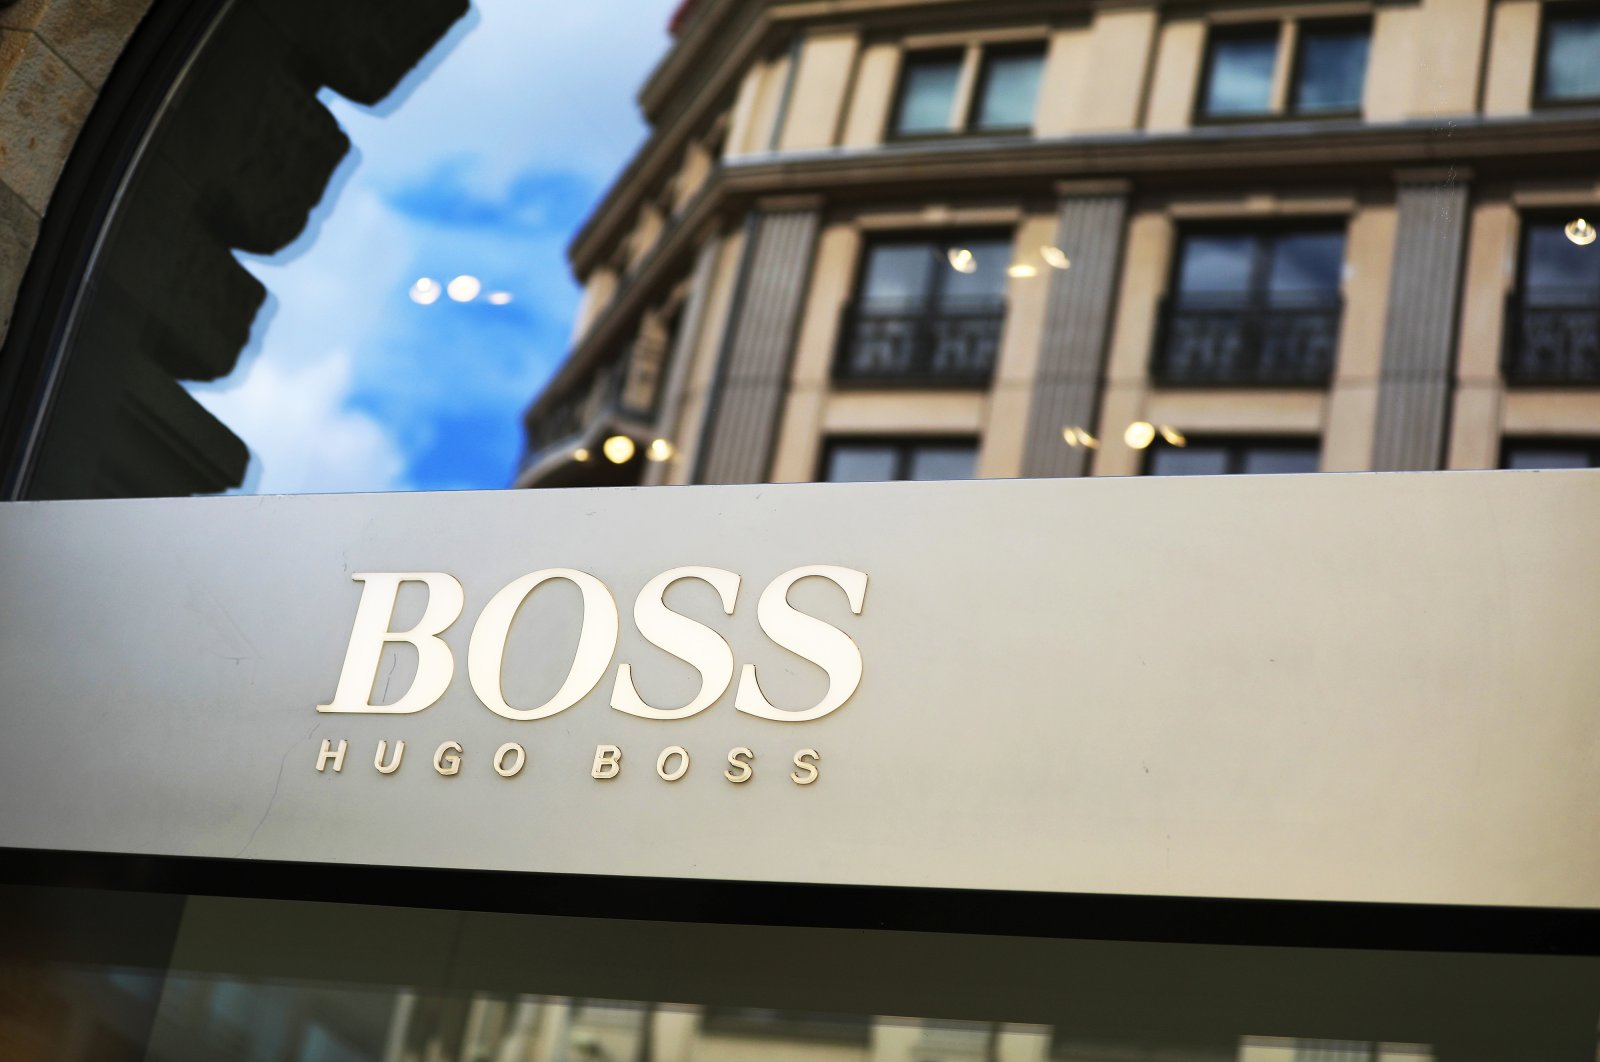 A Hugo Boss store in Berlin, Germany, Aug. 4, 2021. (Getty Images)